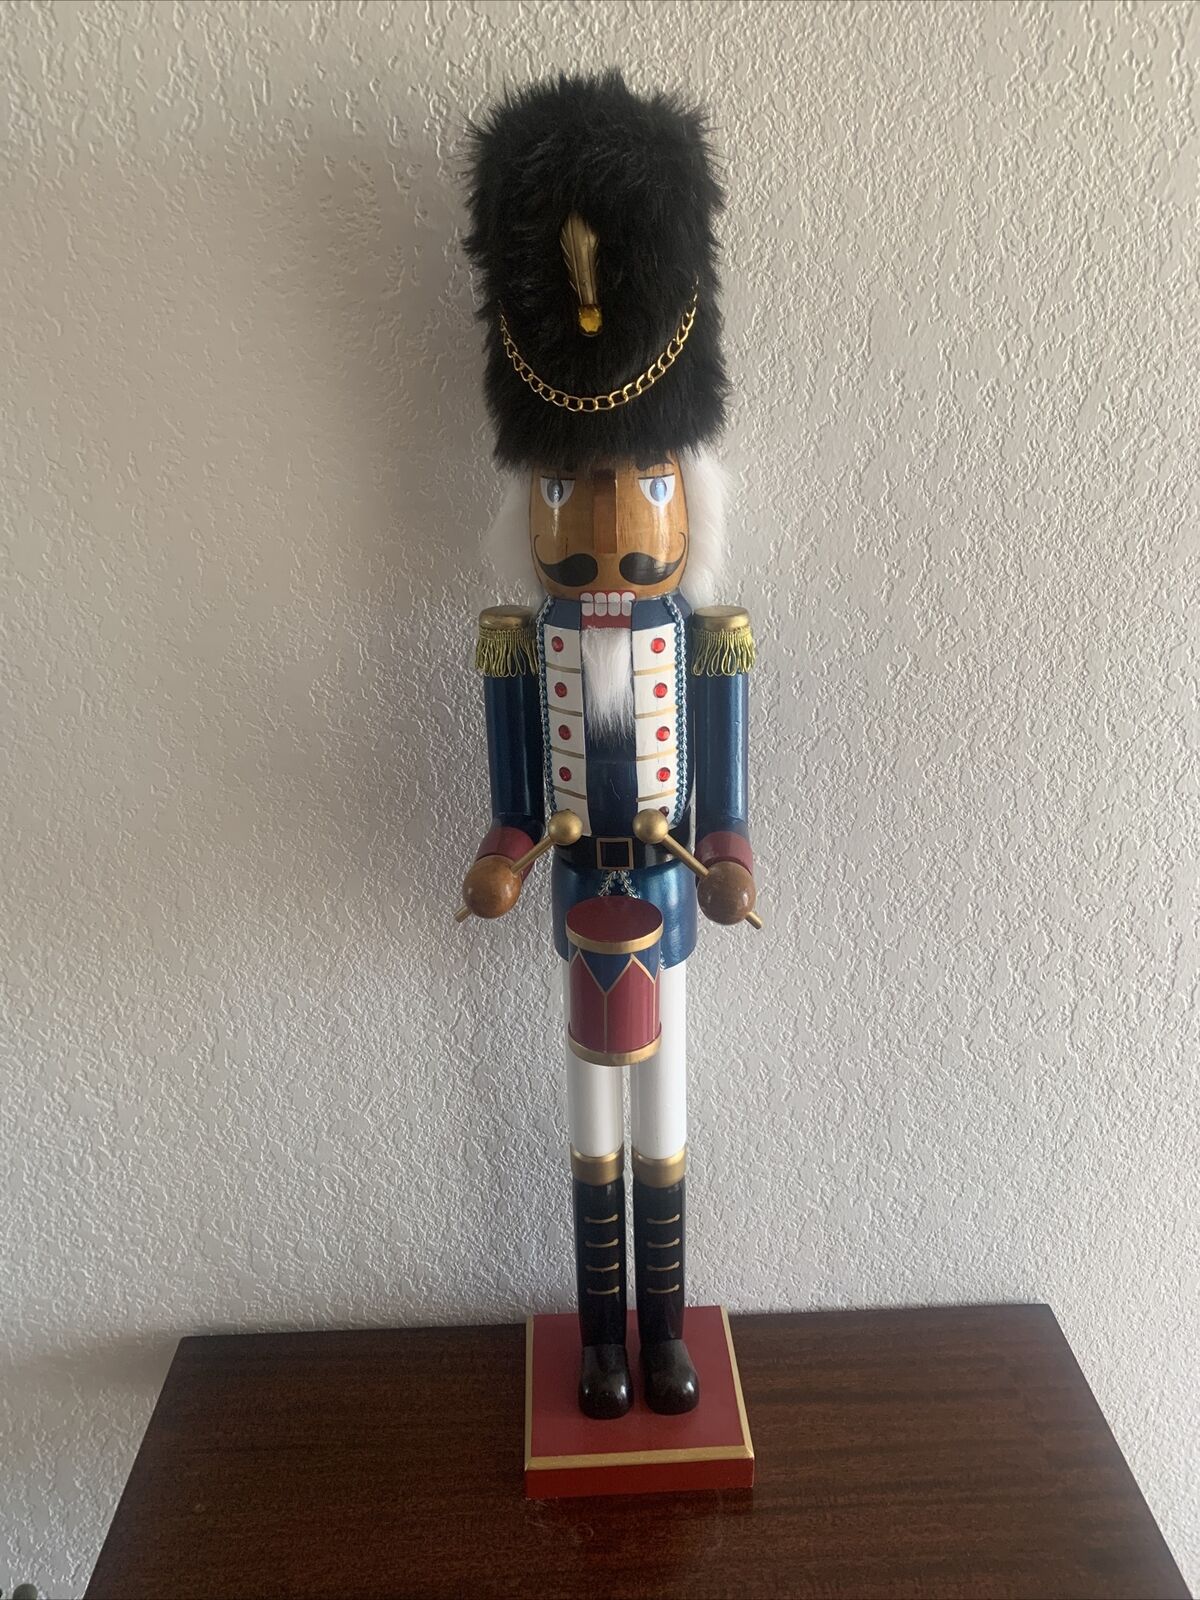 2 Giant Royal Nutcrackers 3ft Tall Bran New And Works Great